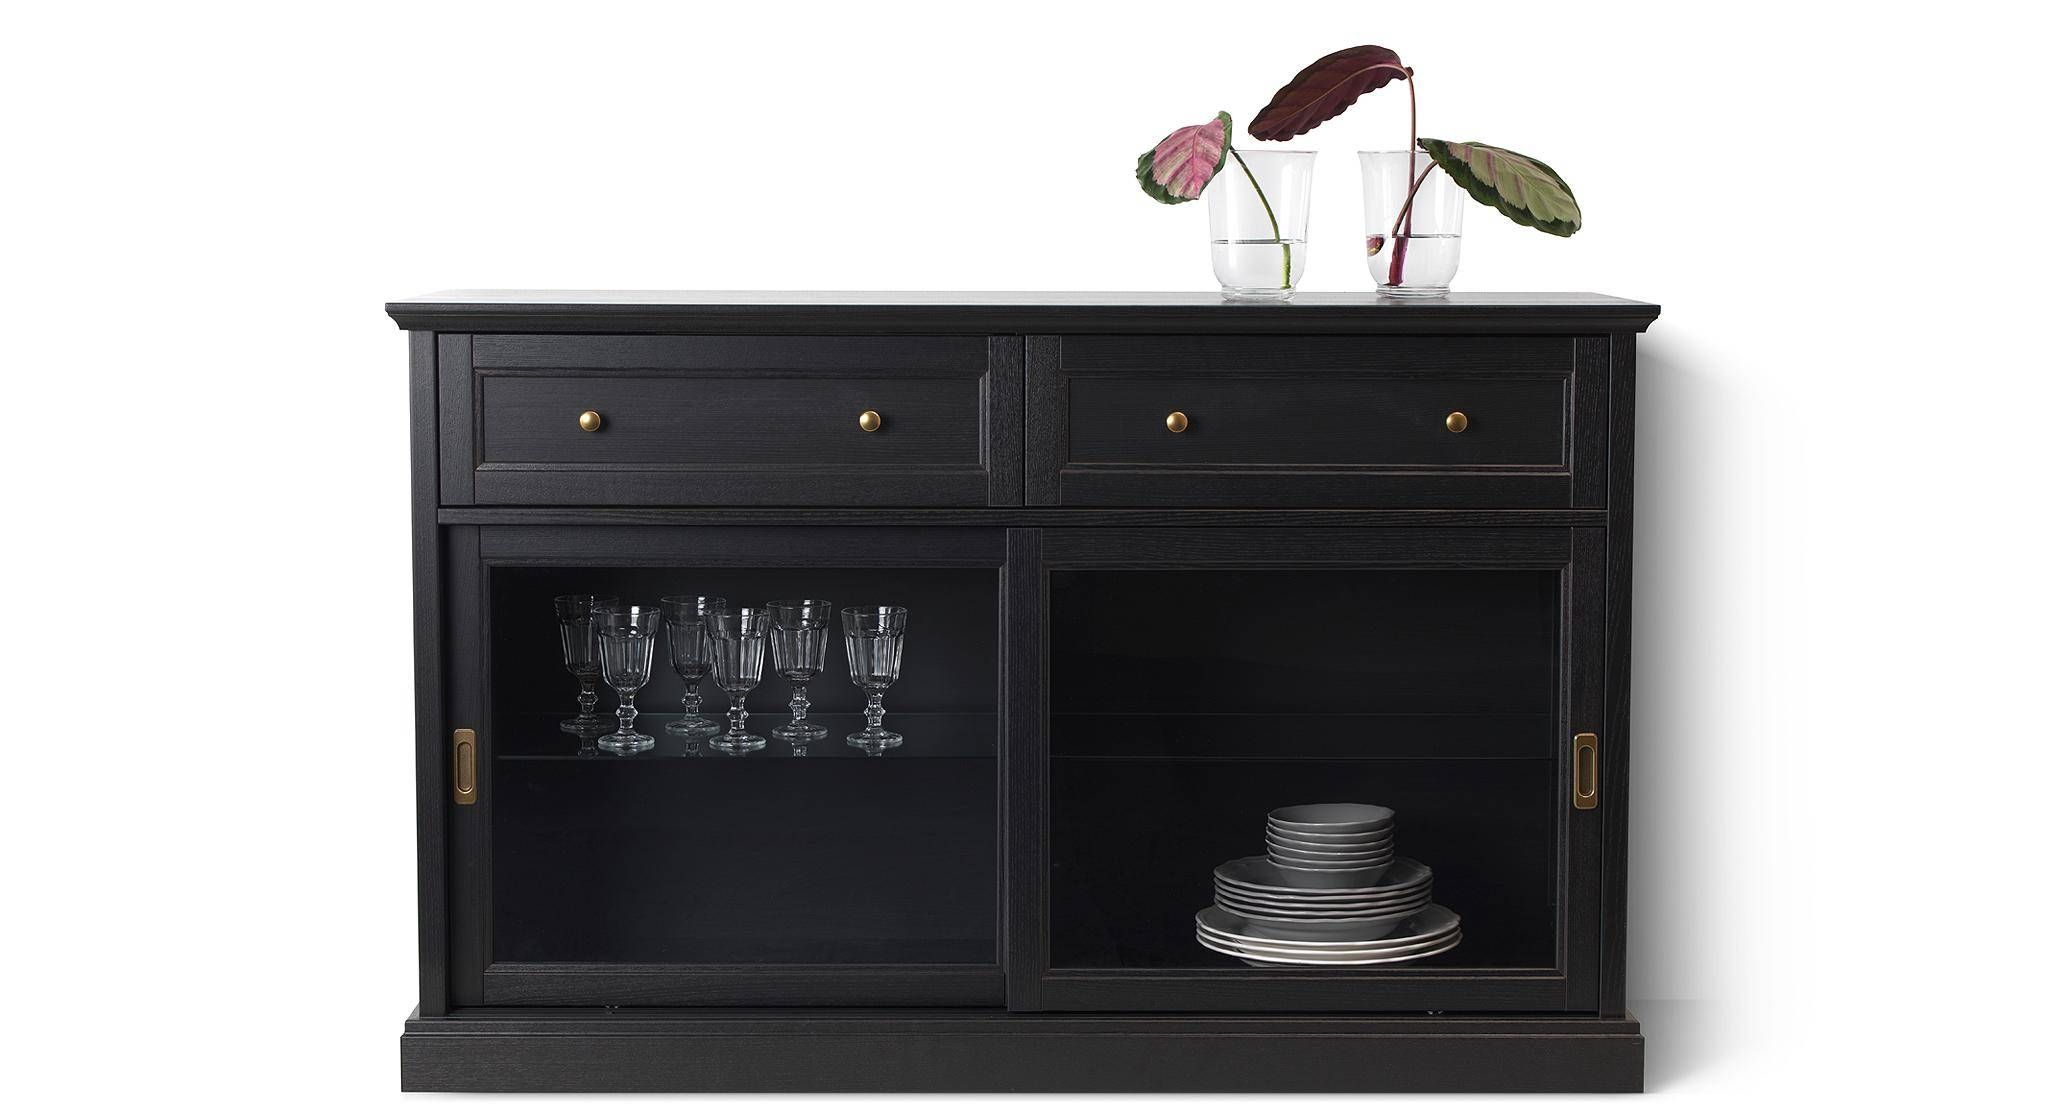 Sideboards & Buffet Cabinets | Ikea With Regard To Sideboard Cabinets (View 8 of 15)